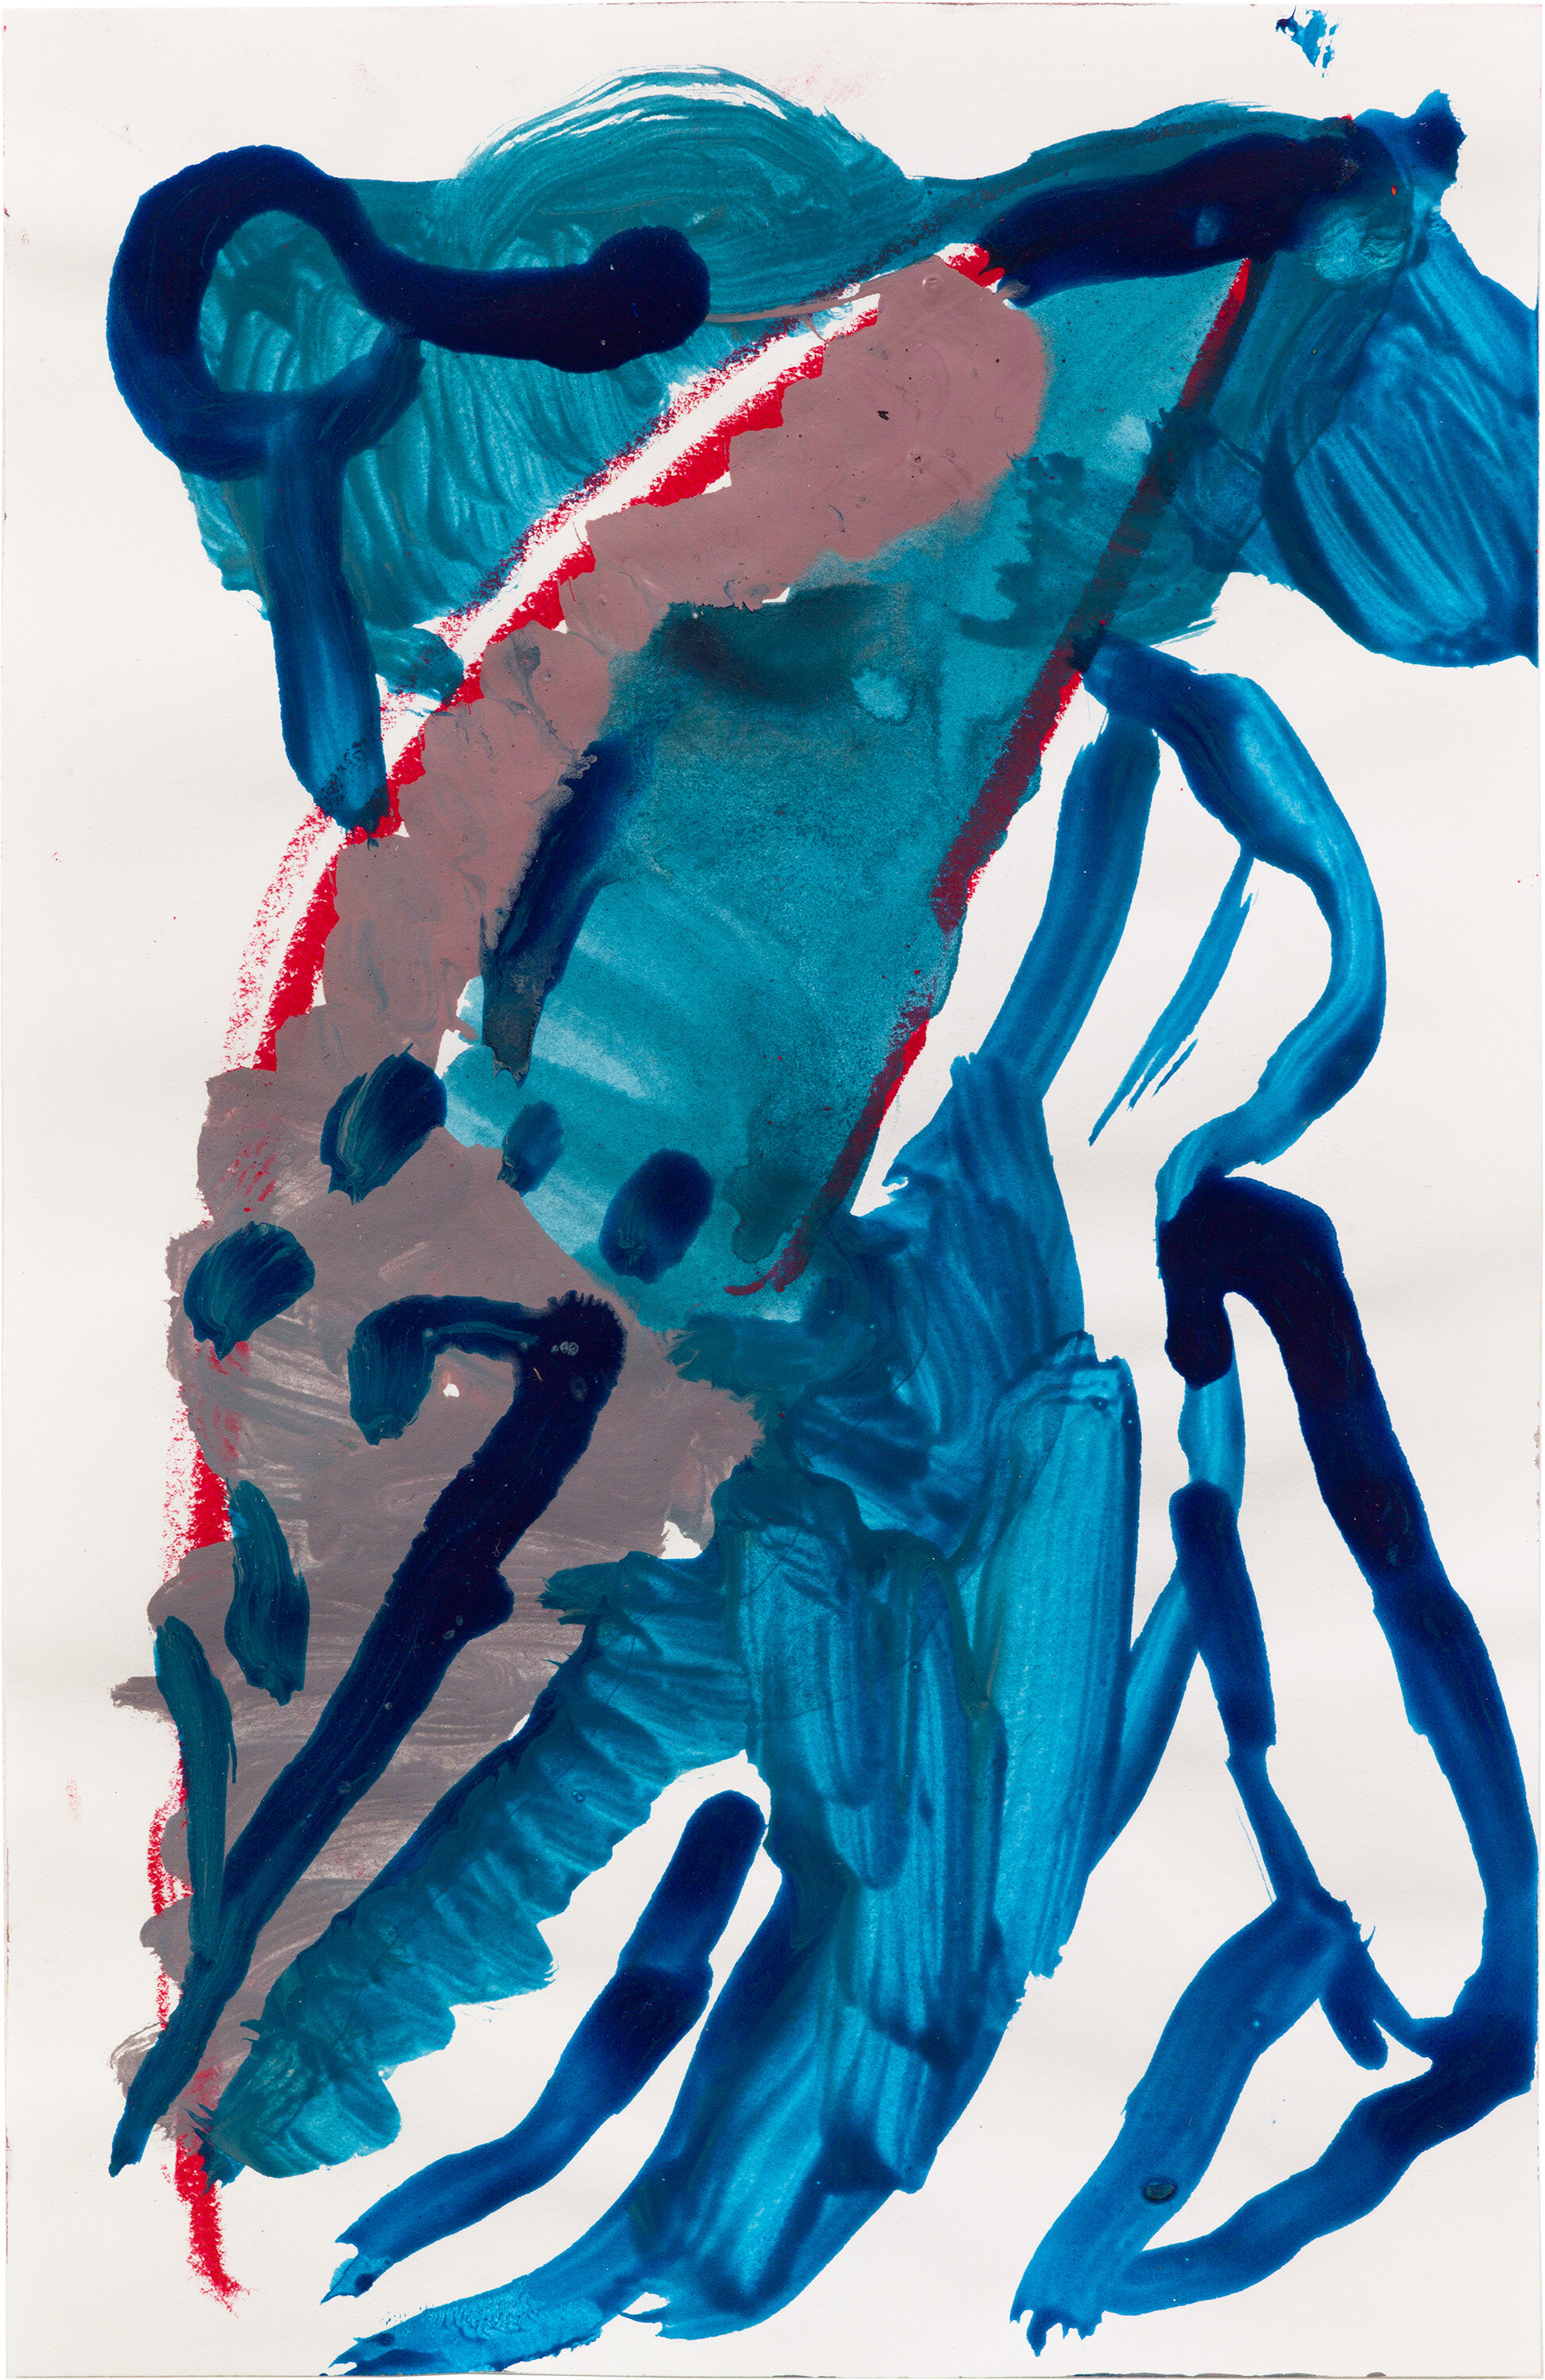  Drew Beattie and Ben Shepard   DBBS-DRW-2013-019   2013  acrylic and oil stick on paper  8.5 x 5.5 inches 